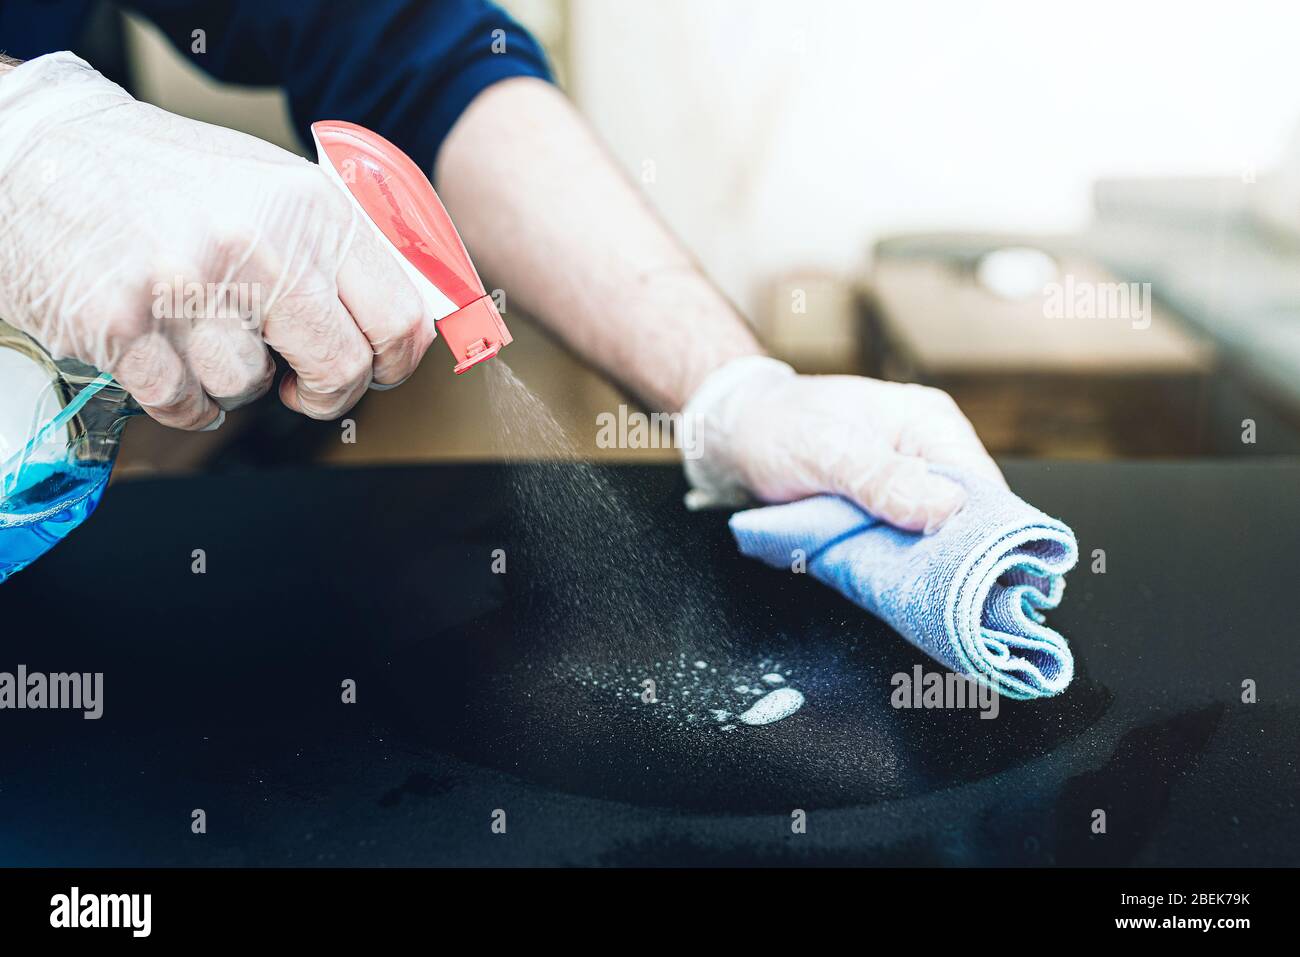 close-up of person wearing disposable one-way gloves using disinfectant spray to clean table surface during coronavirus covid-19 pandemic Stock Photo